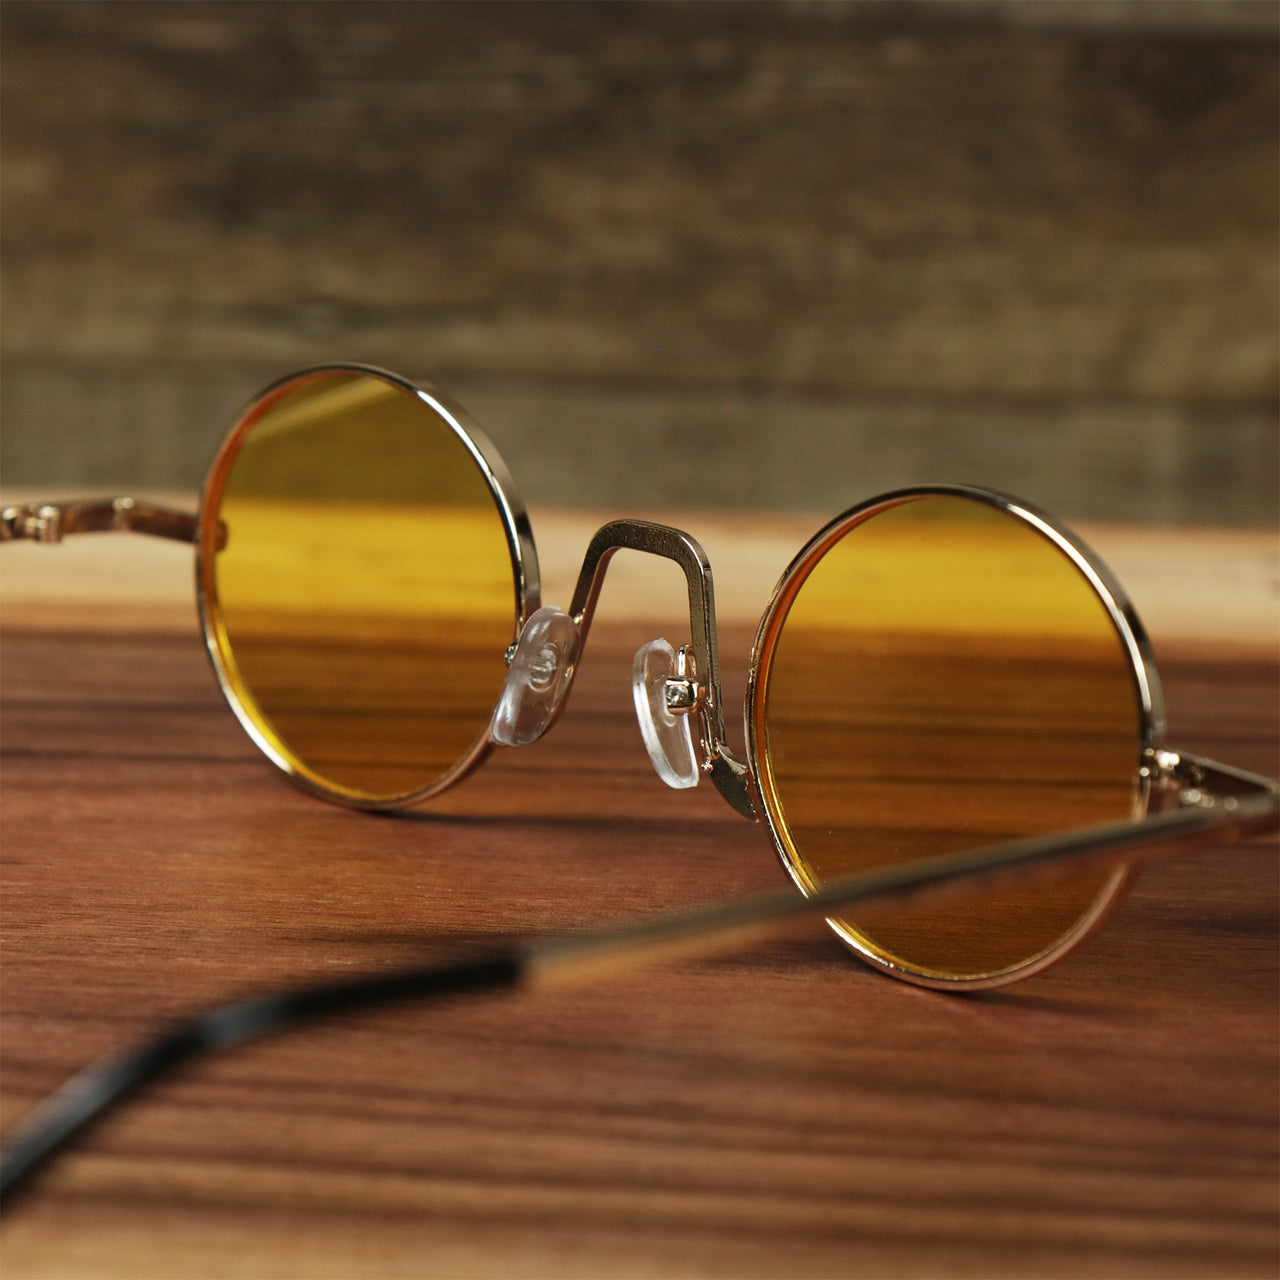 The inside of the Round Frames Yellow Lens Sunglasses with Gold Frame